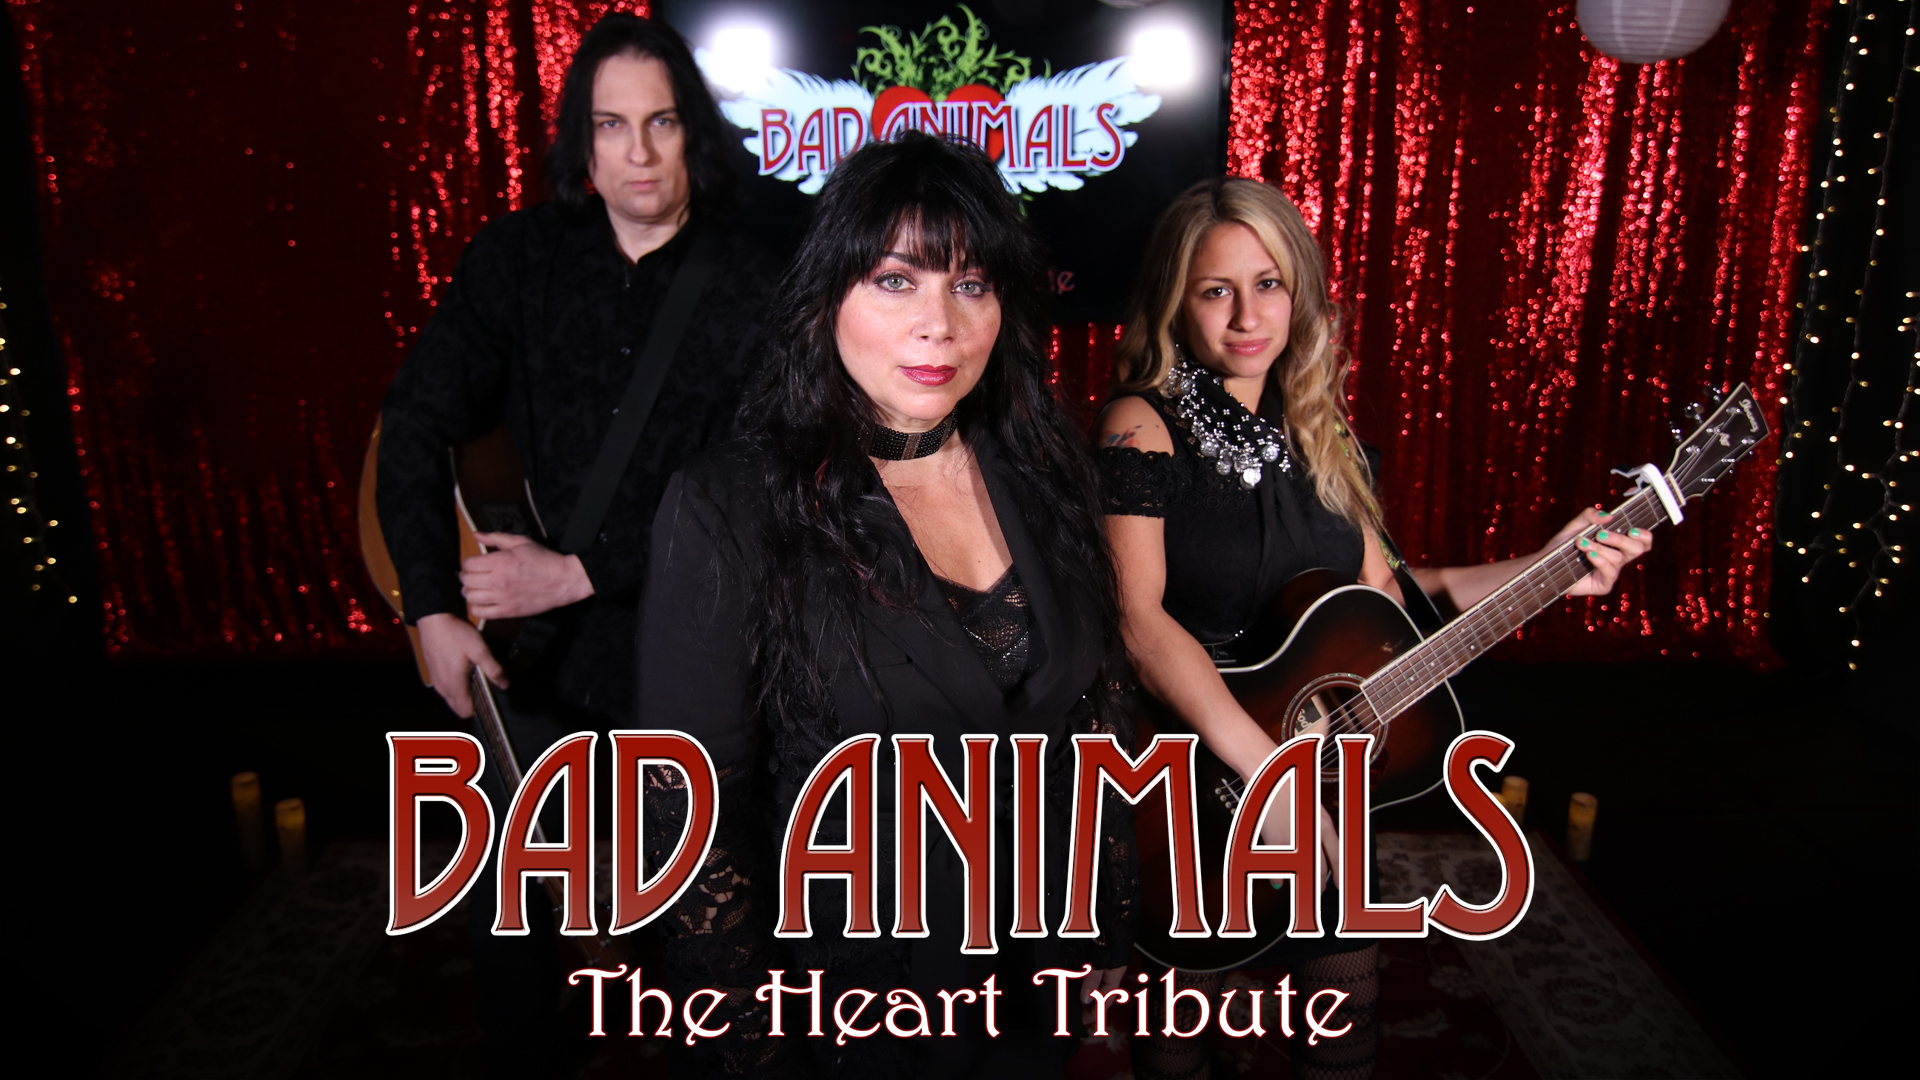 OUR SHOW – Bad Animals